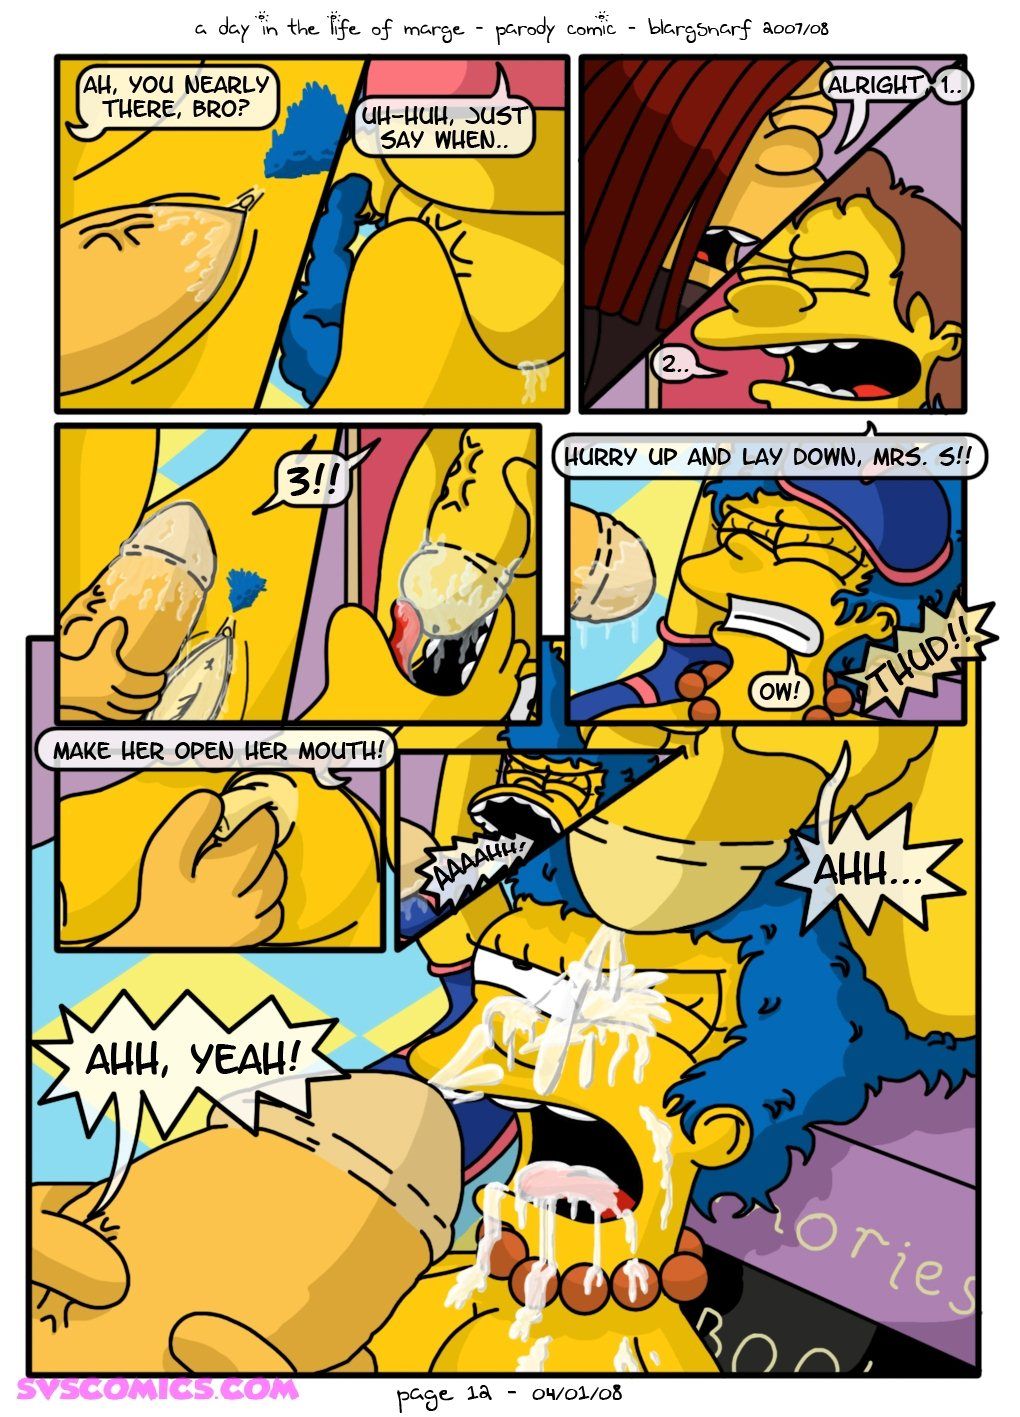 [Blargsnarf] A Day Life of Marge (The Simpsons) page 13